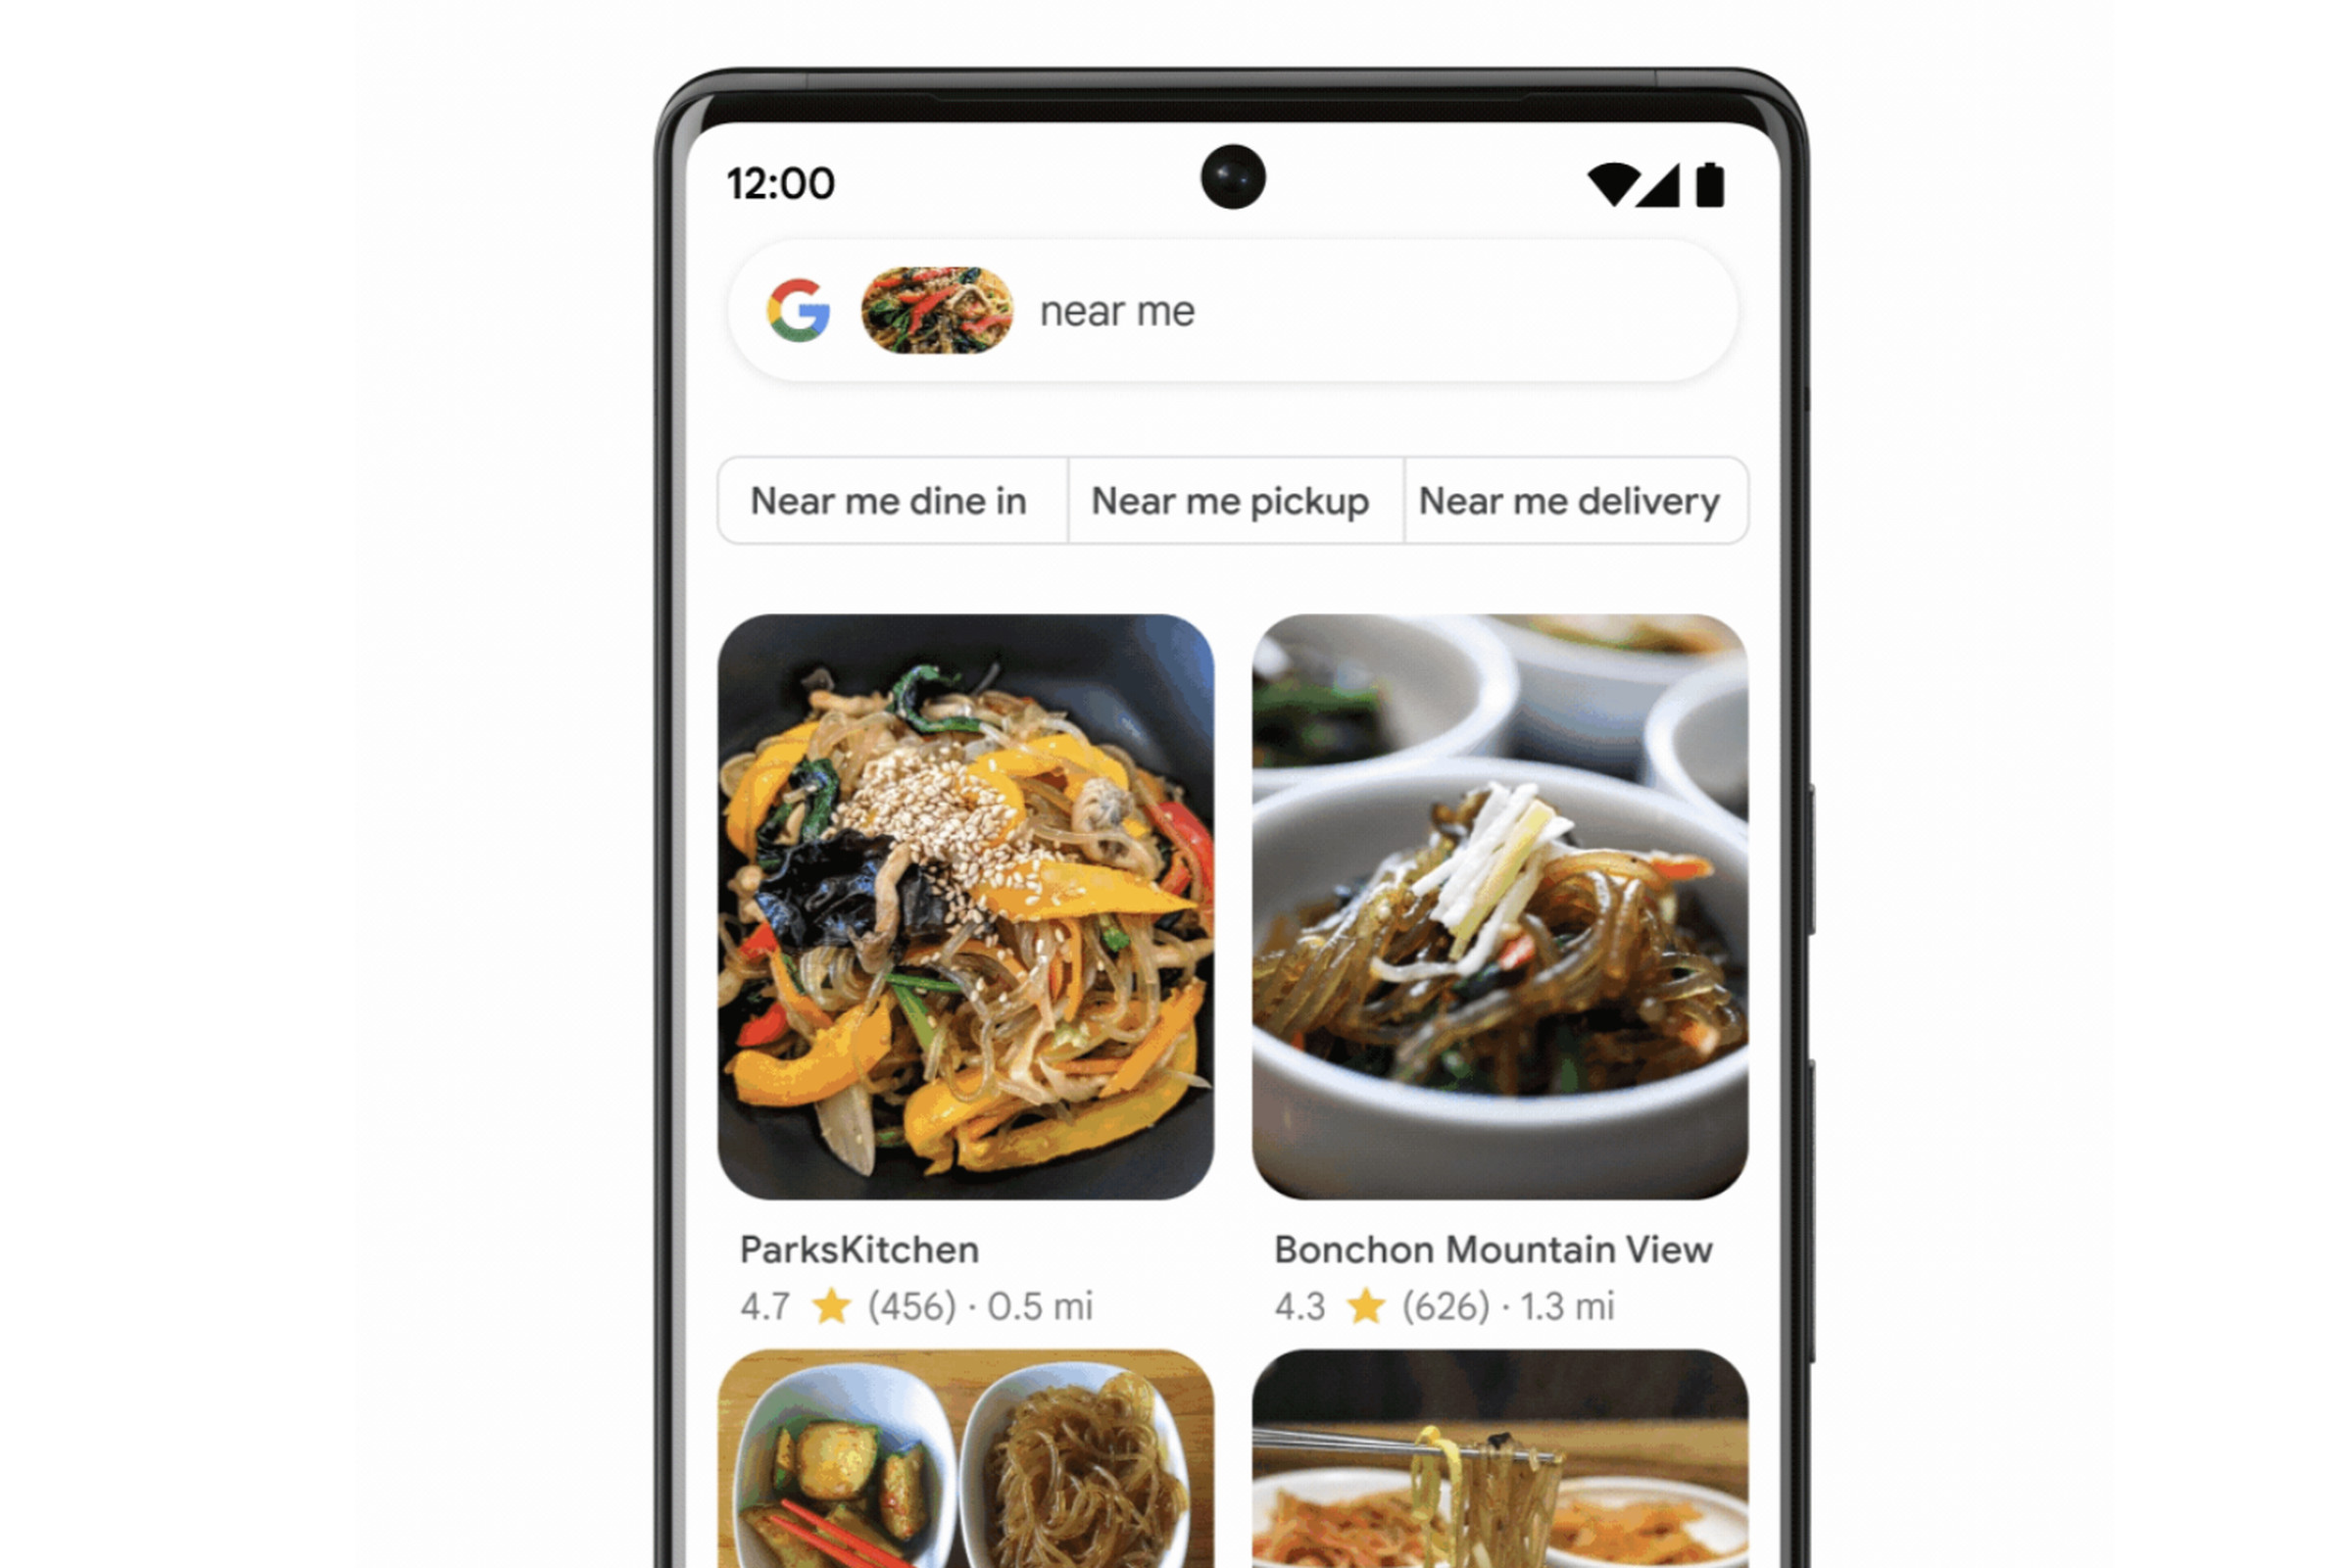 “Near me” lets you search for pictures of objects locally.